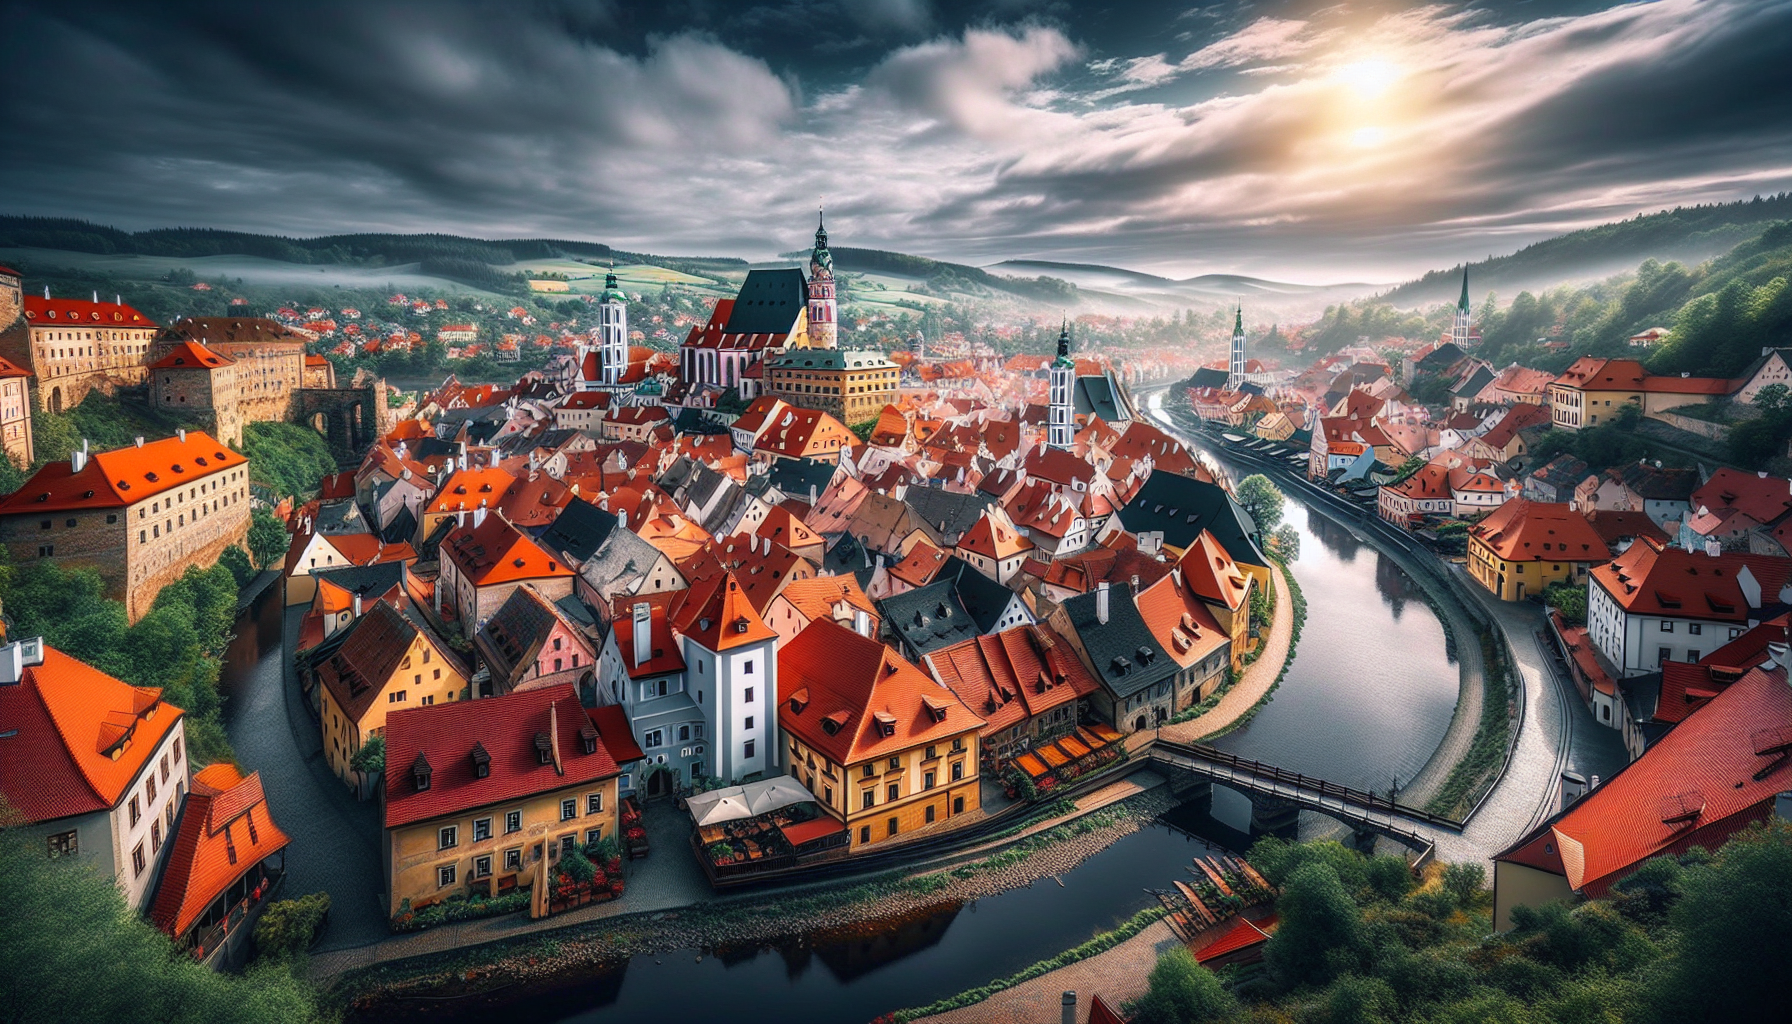 discover the enchanting český krumlov in the czech republic, one of the best places to visit in europe. explore its fairytale town and immerse yourself in its rich history and captivating atmosphere.